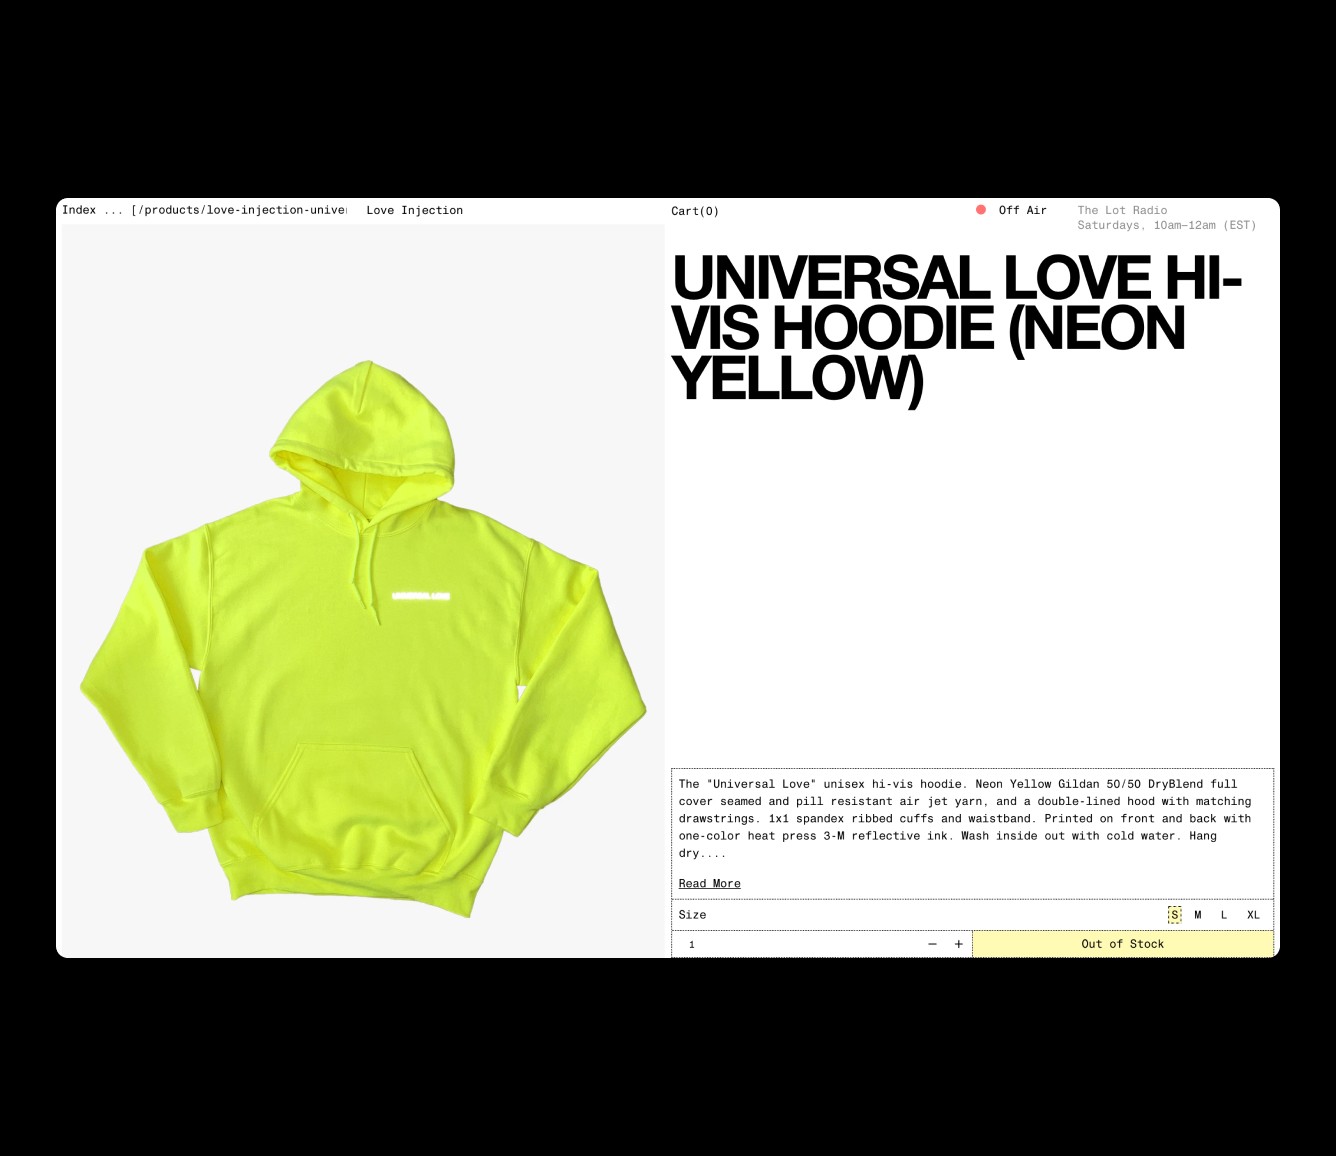 love injection product detail page featuring universal love hi-vis hoodie (neon yellow)